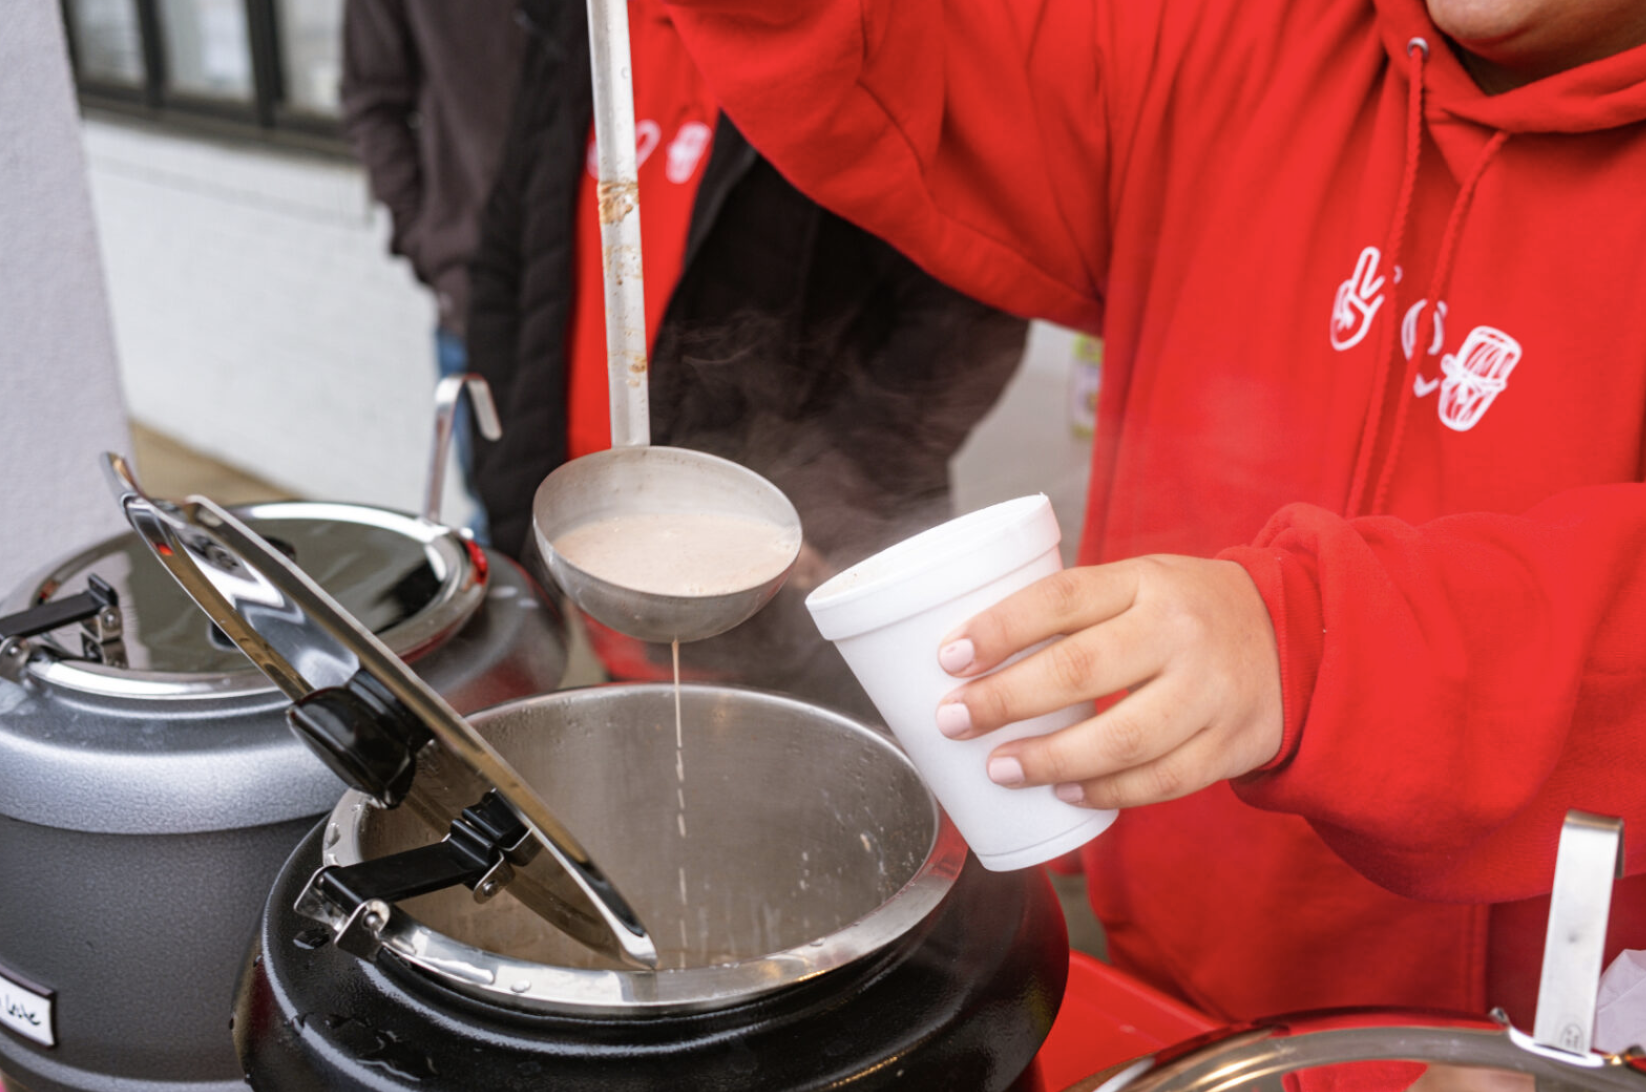 atole being poured